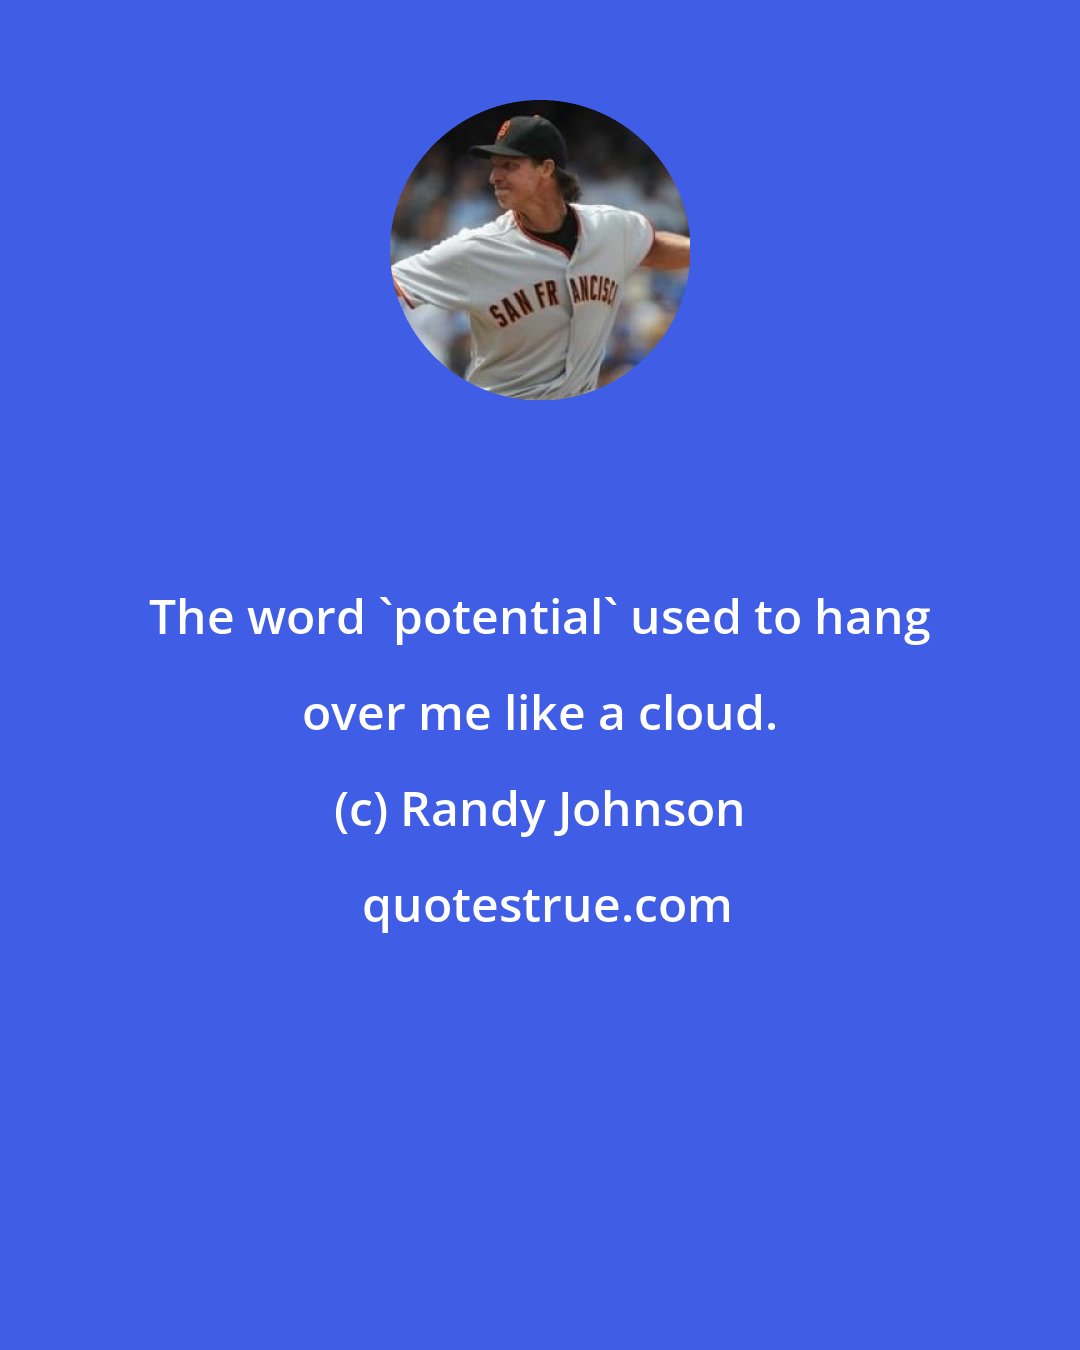 Randy Johnson: The word 'potential' used to hang over me like a cloud.